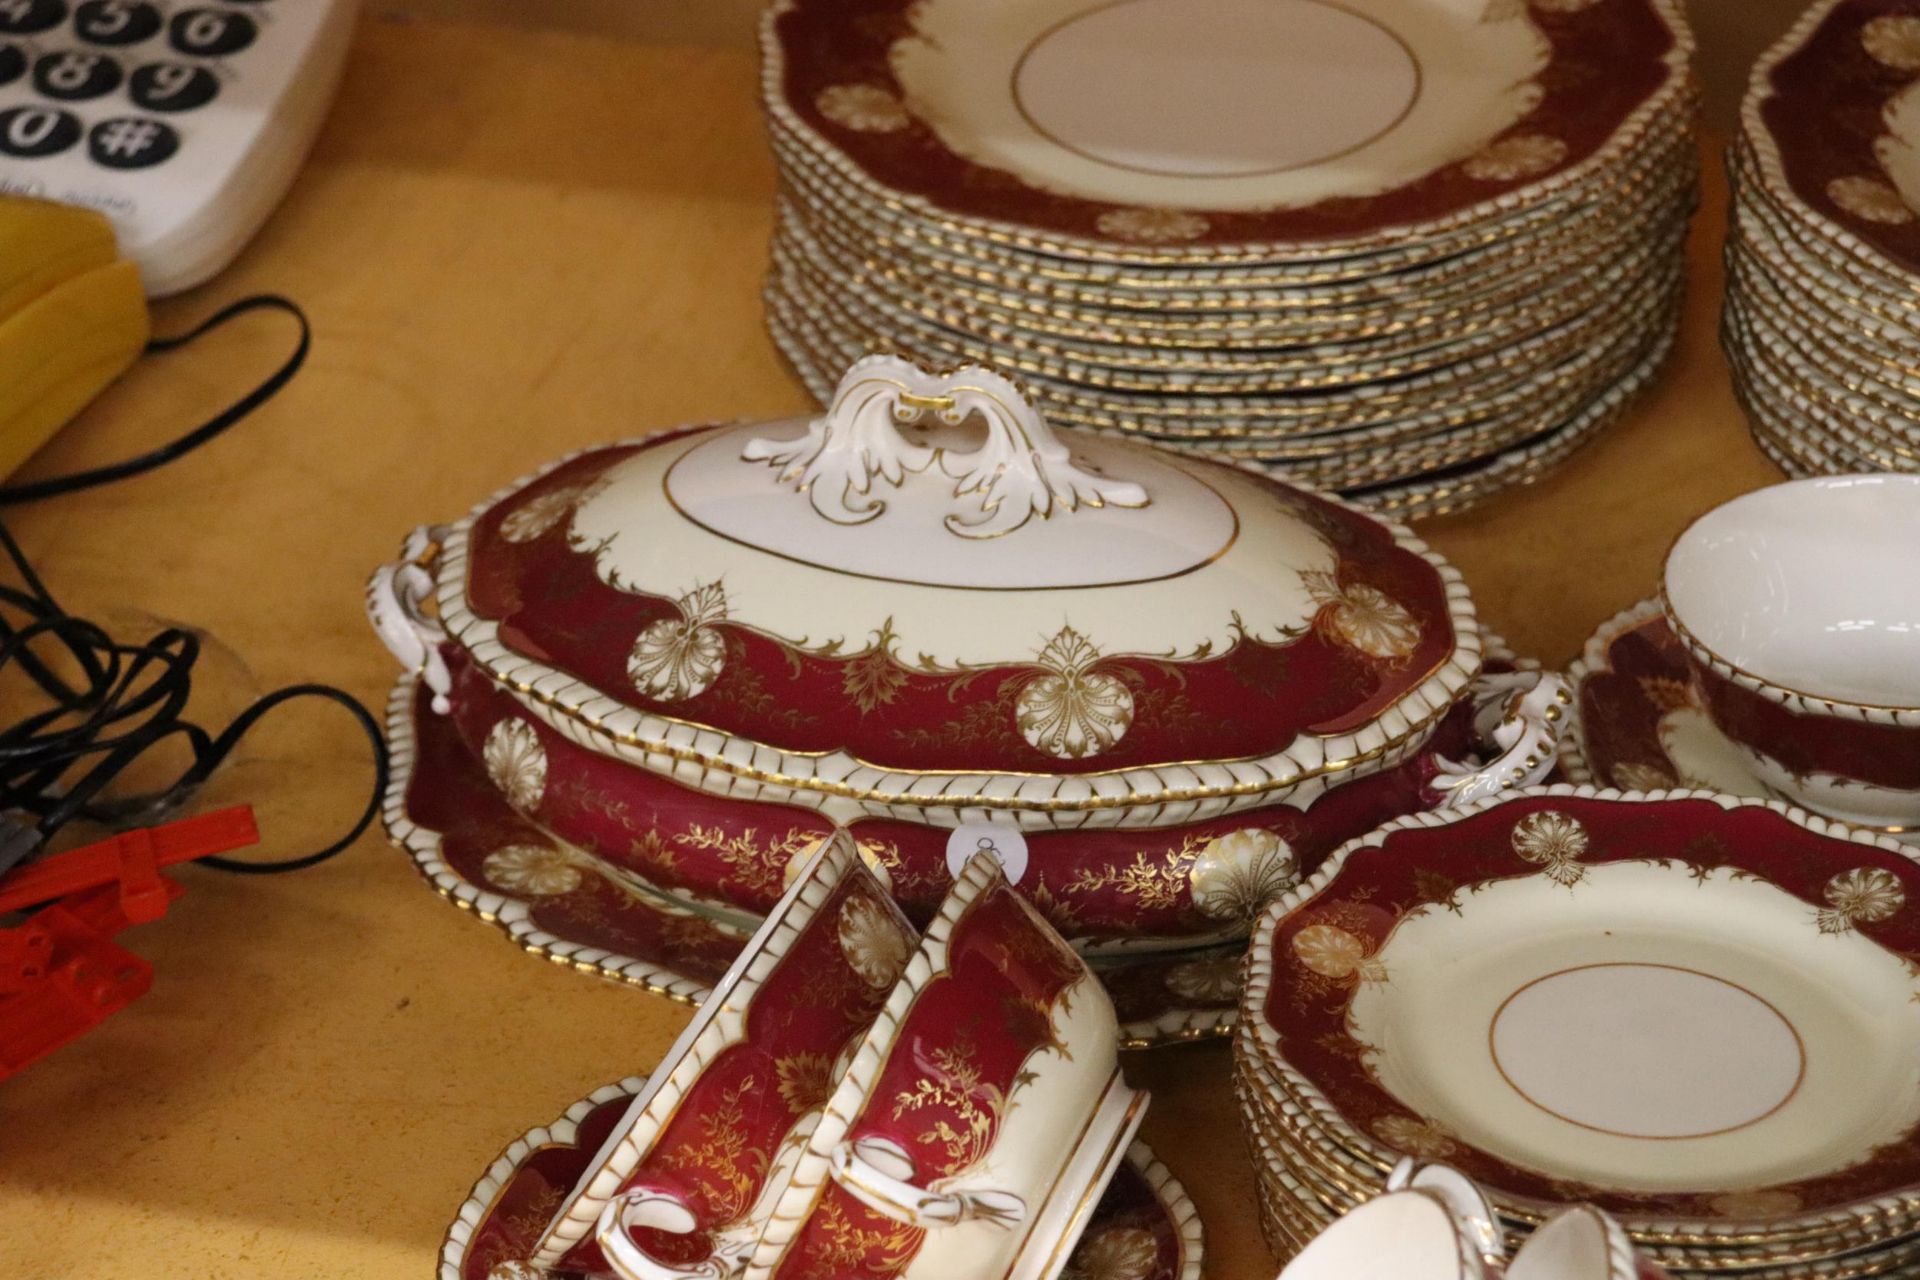 AN EIGHTY EIGHT PIECE ROYAL WORCESTER HATFIELD RED DINNER SERVICE GOLD SHELLS AND LEAVES WITH A - Image 3 of 7